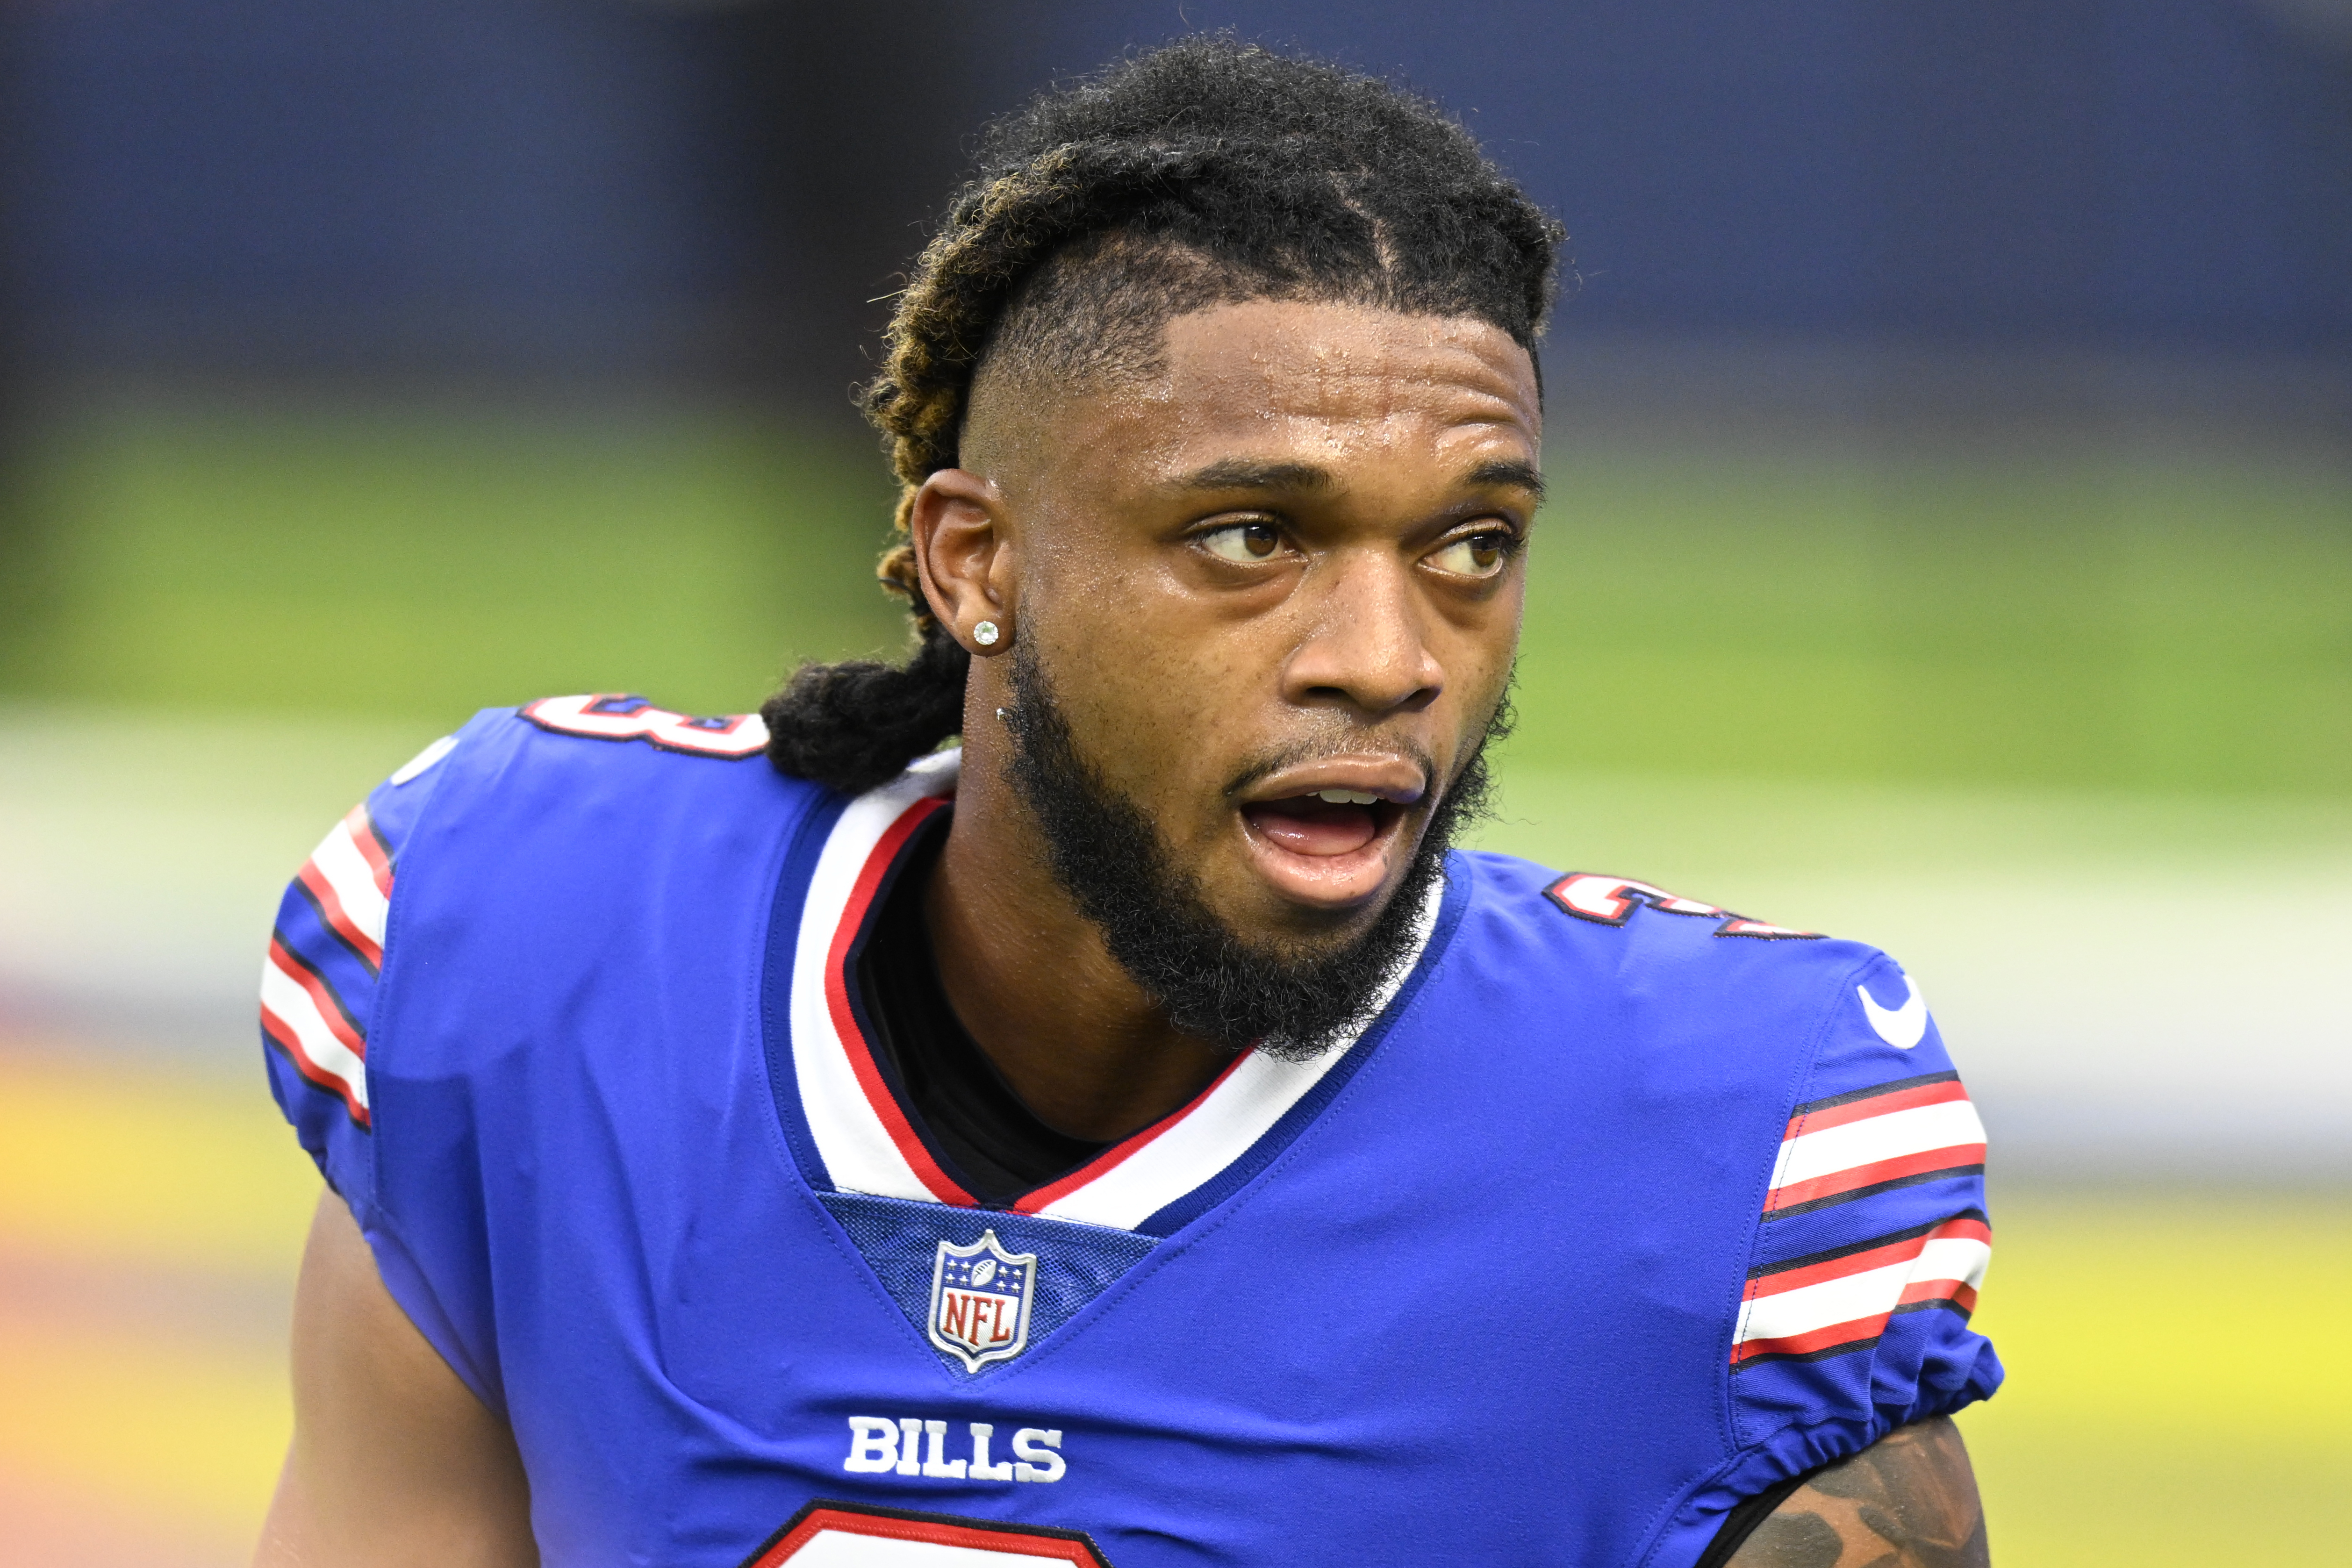 Damar Hamlin, defenseman for the NFL's Buffalo Bills, was released after spending a week in the hospital after cardiac arrest suffered last Sunday against the Bengals (AP Photo/John McCoy, File)